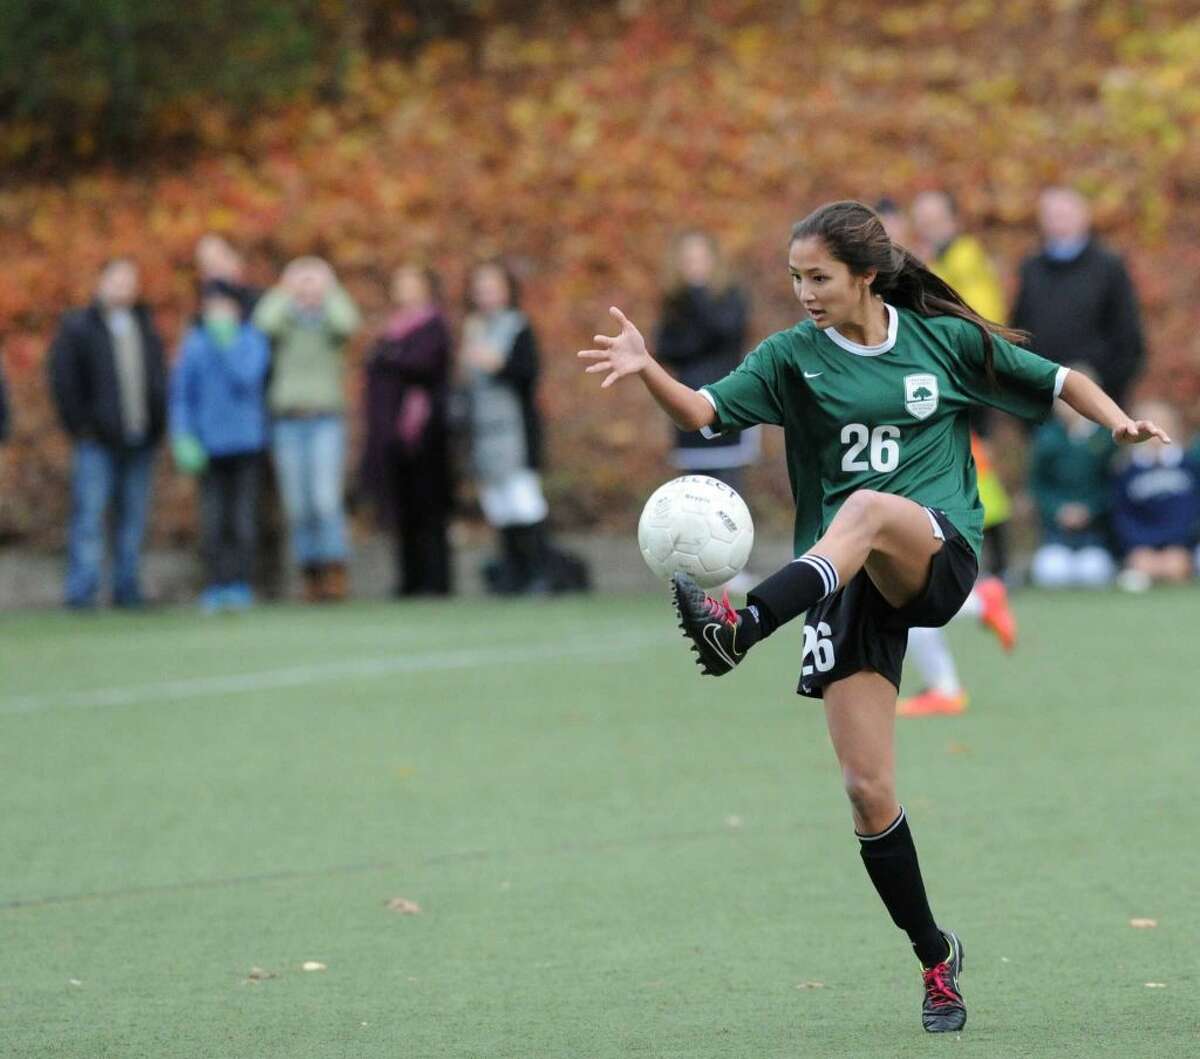 Senior forward Maggie Basta is one of the captains of the Greenwich Academy soccer team.